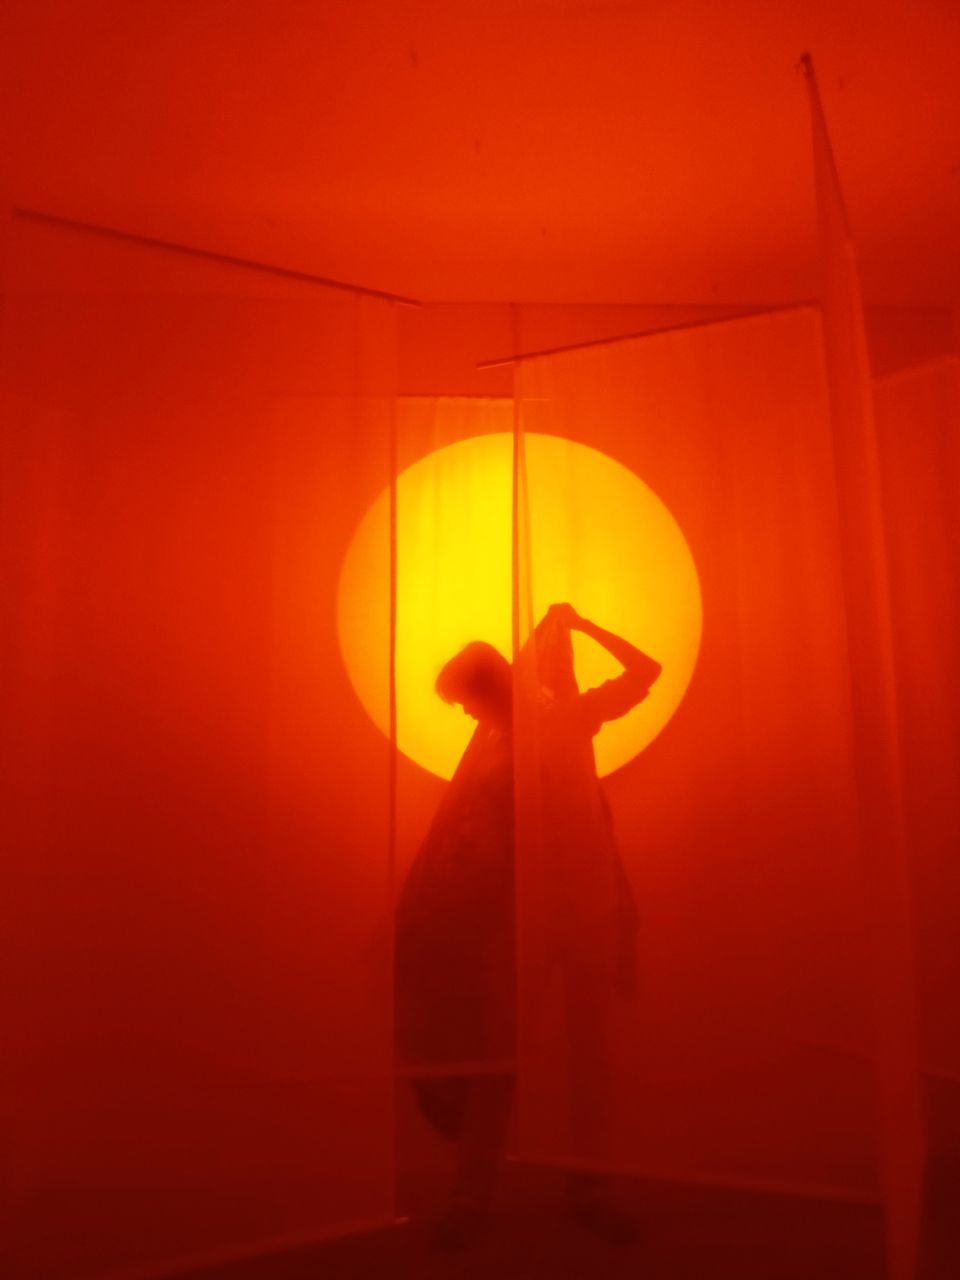 red, yellow, light, lighting, silhouette, orange, indoors, one person, orange color, illuminated, standing, lighting equipment, circle, wall - building feature, adult